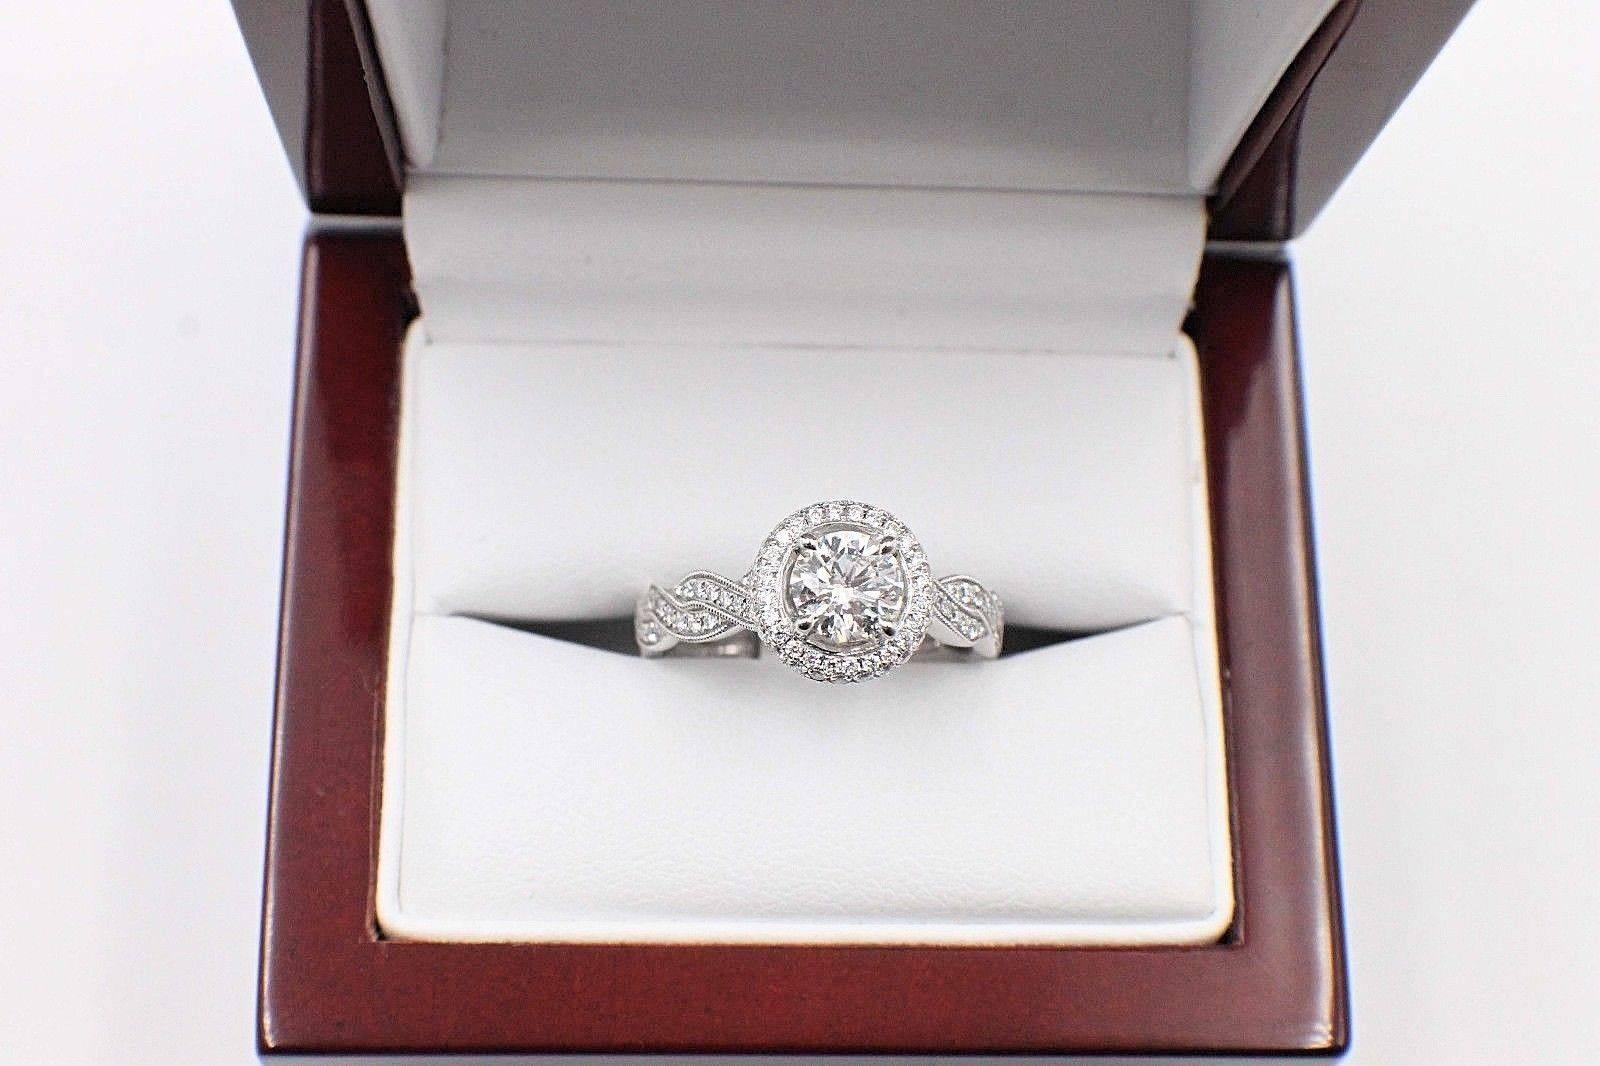 Simon G Diamond Engagement Ring Twisted Design Halo 1.15 Carat GIA Certificate For Sale 2